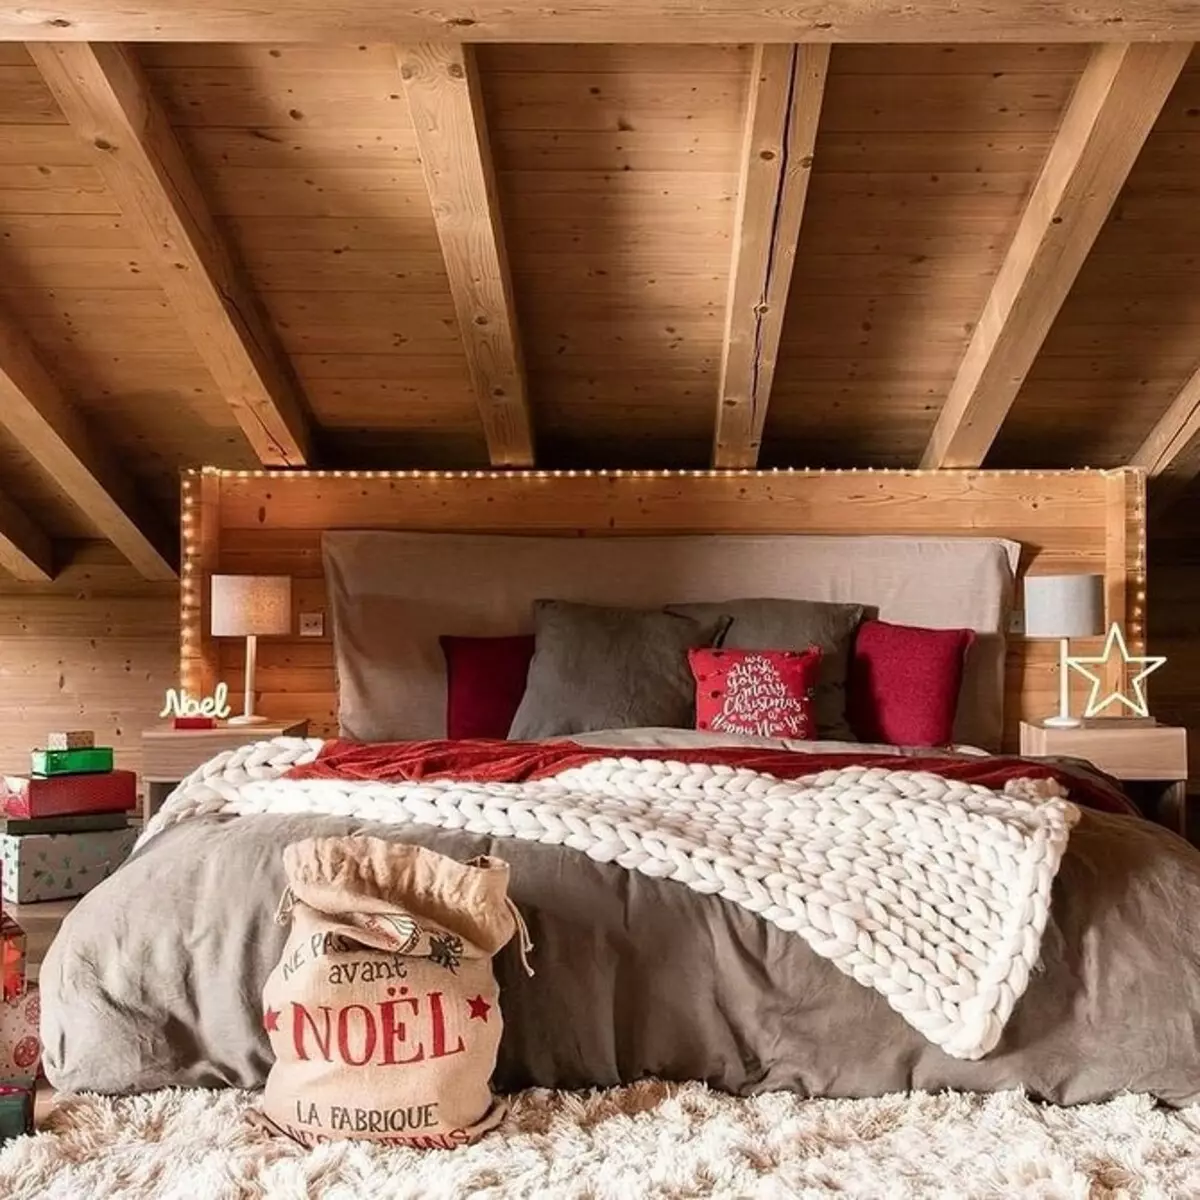 How to issue an interior of the attic at the dacha with a double or single roof 4292_116